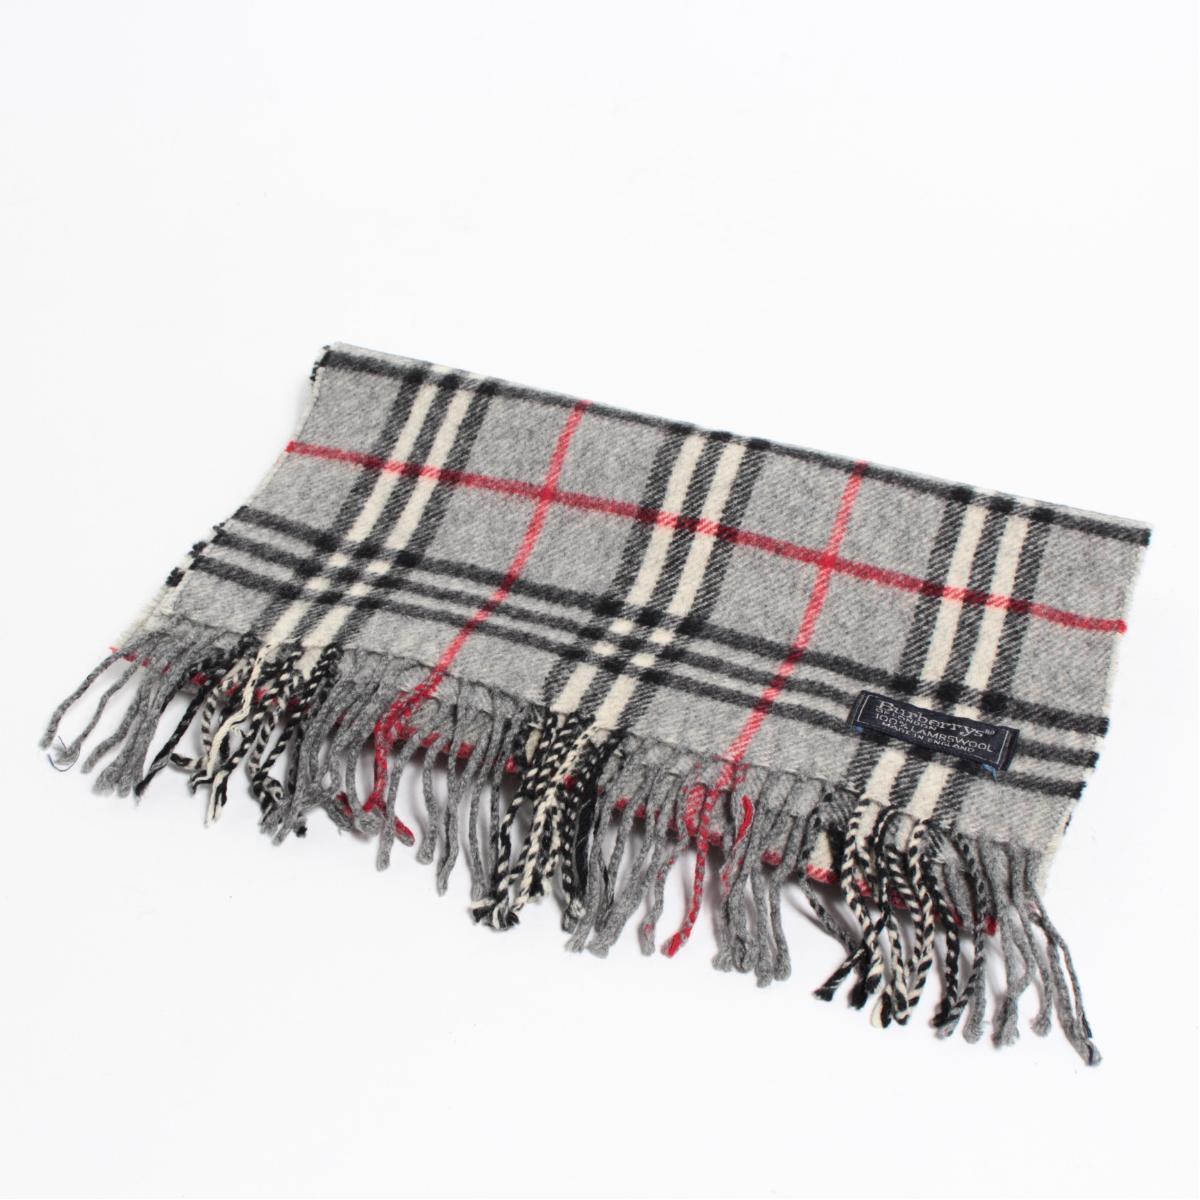 burberry scarf price in london